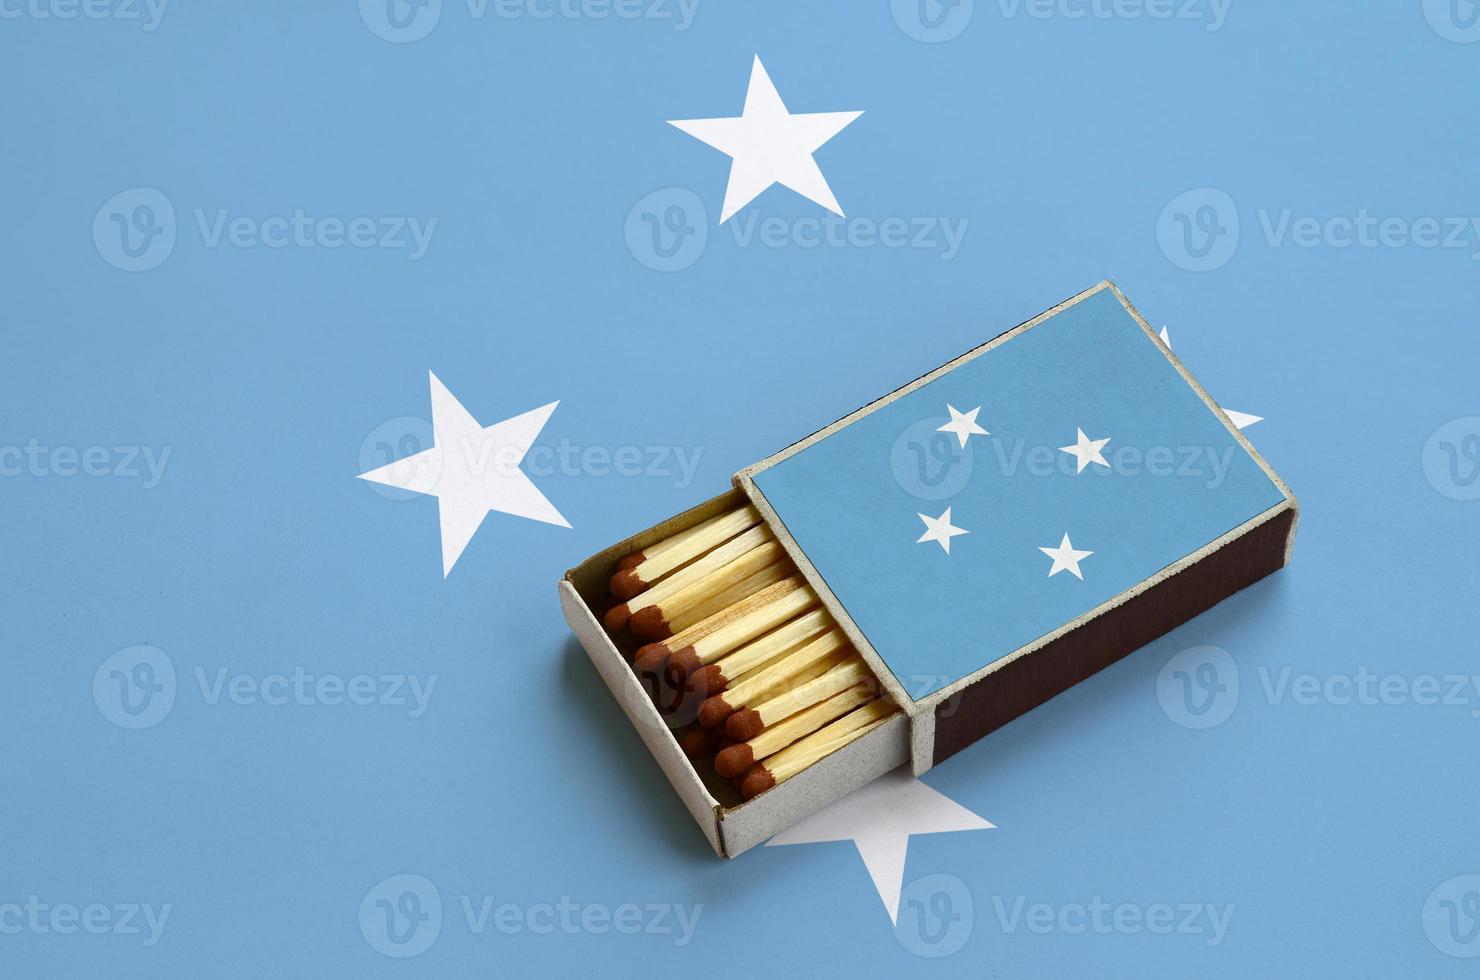 Micronesia flag is shown in an open matchbox, which is filled with matches and lies on a large flag photo